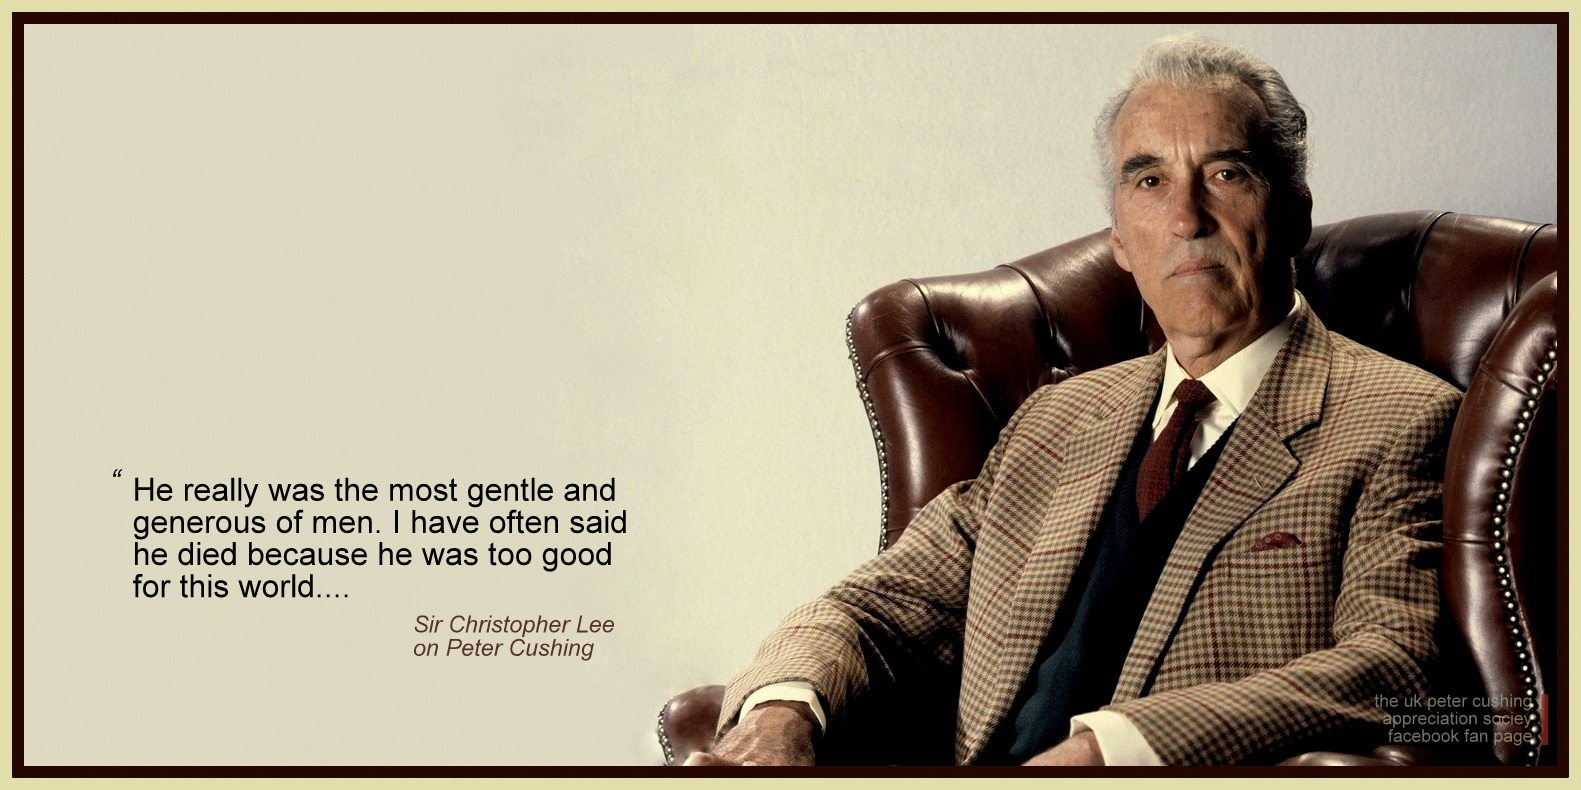 An absolute pleasure of listening to the legendary Sir Christopher Lee